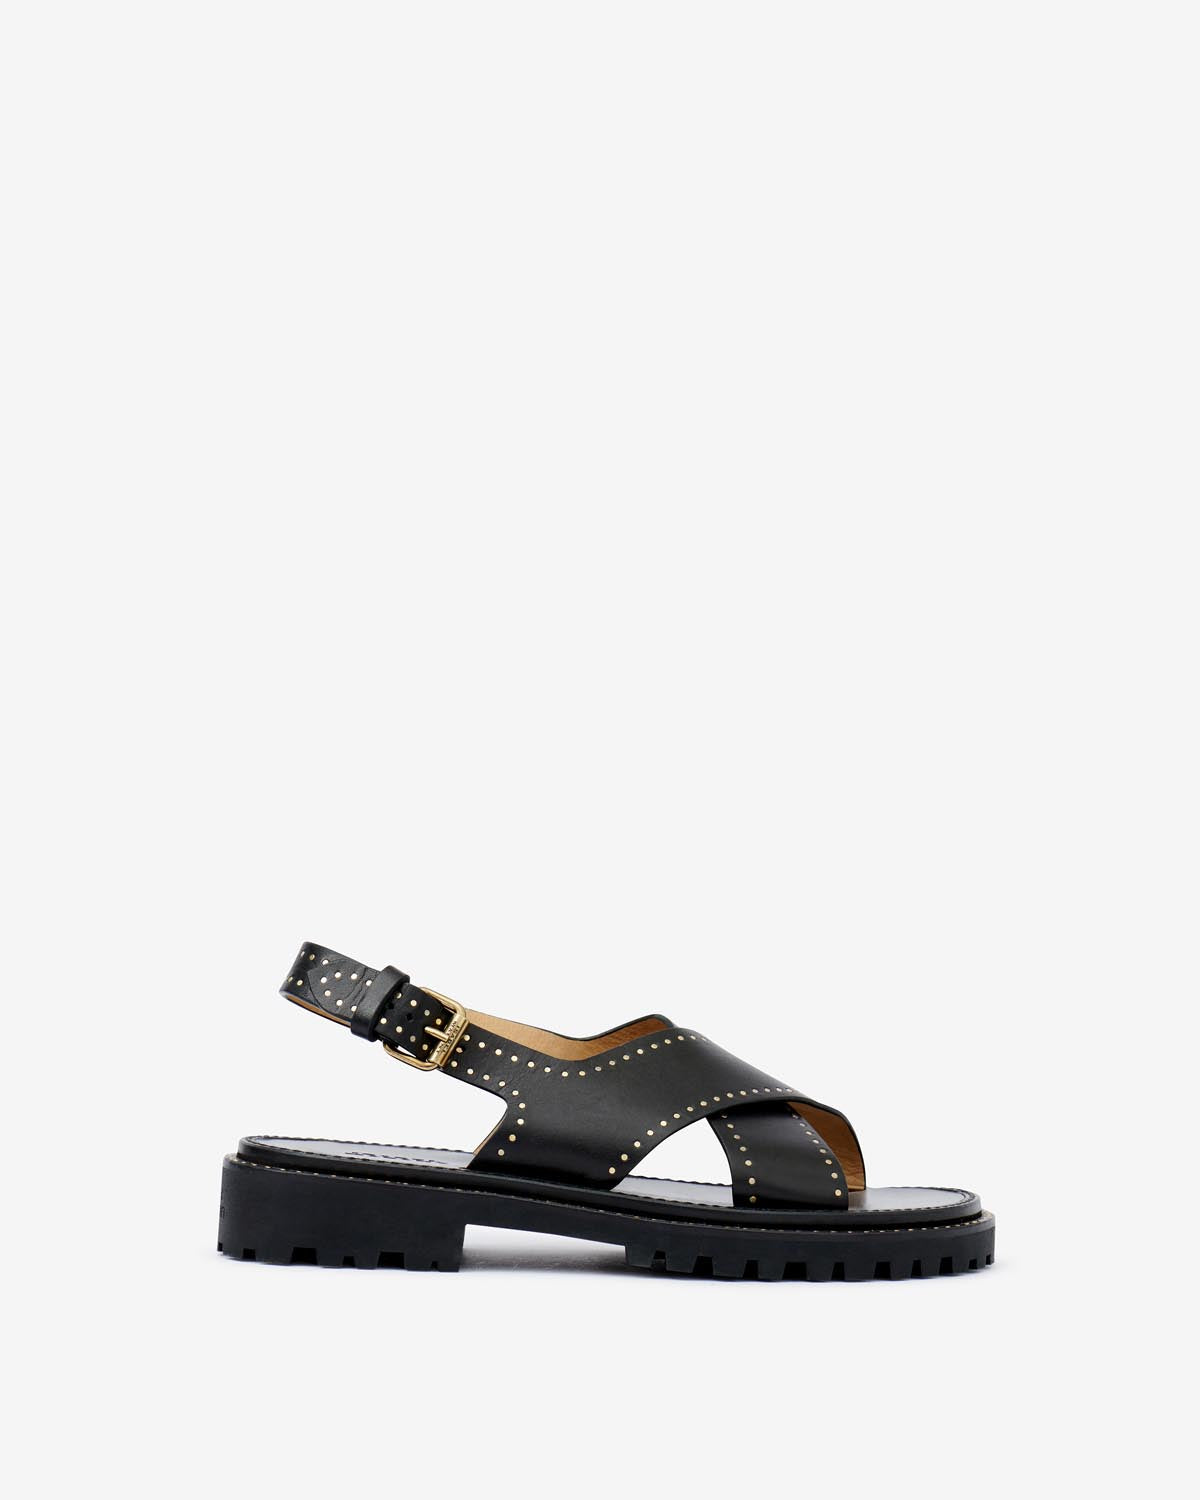 Sandals and Mules Woman | ISABEL MARANT Official Online Store